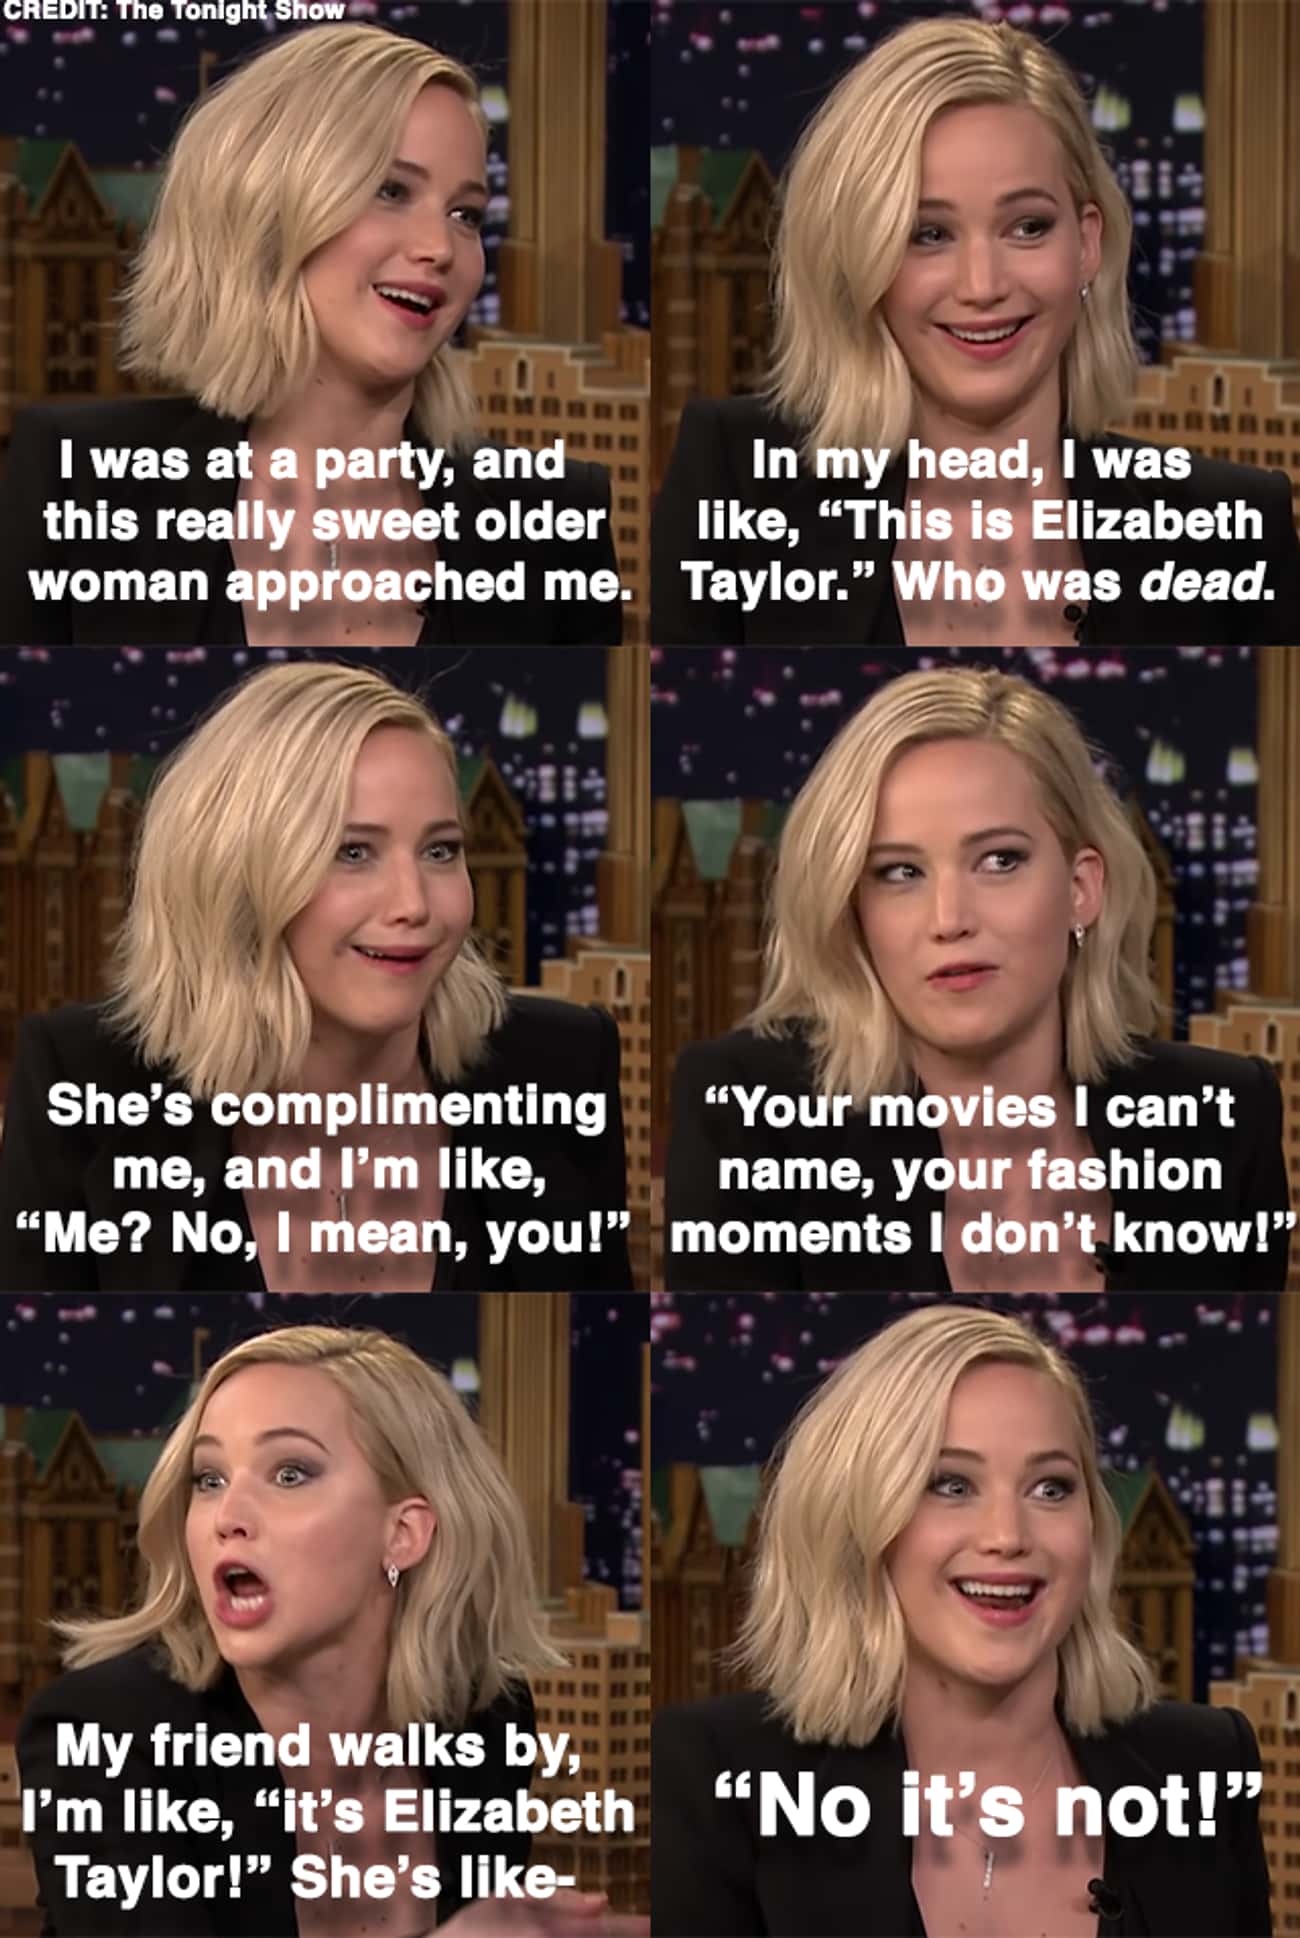 When Jennifer Thought She Met Elizabeth Taylor At A Party